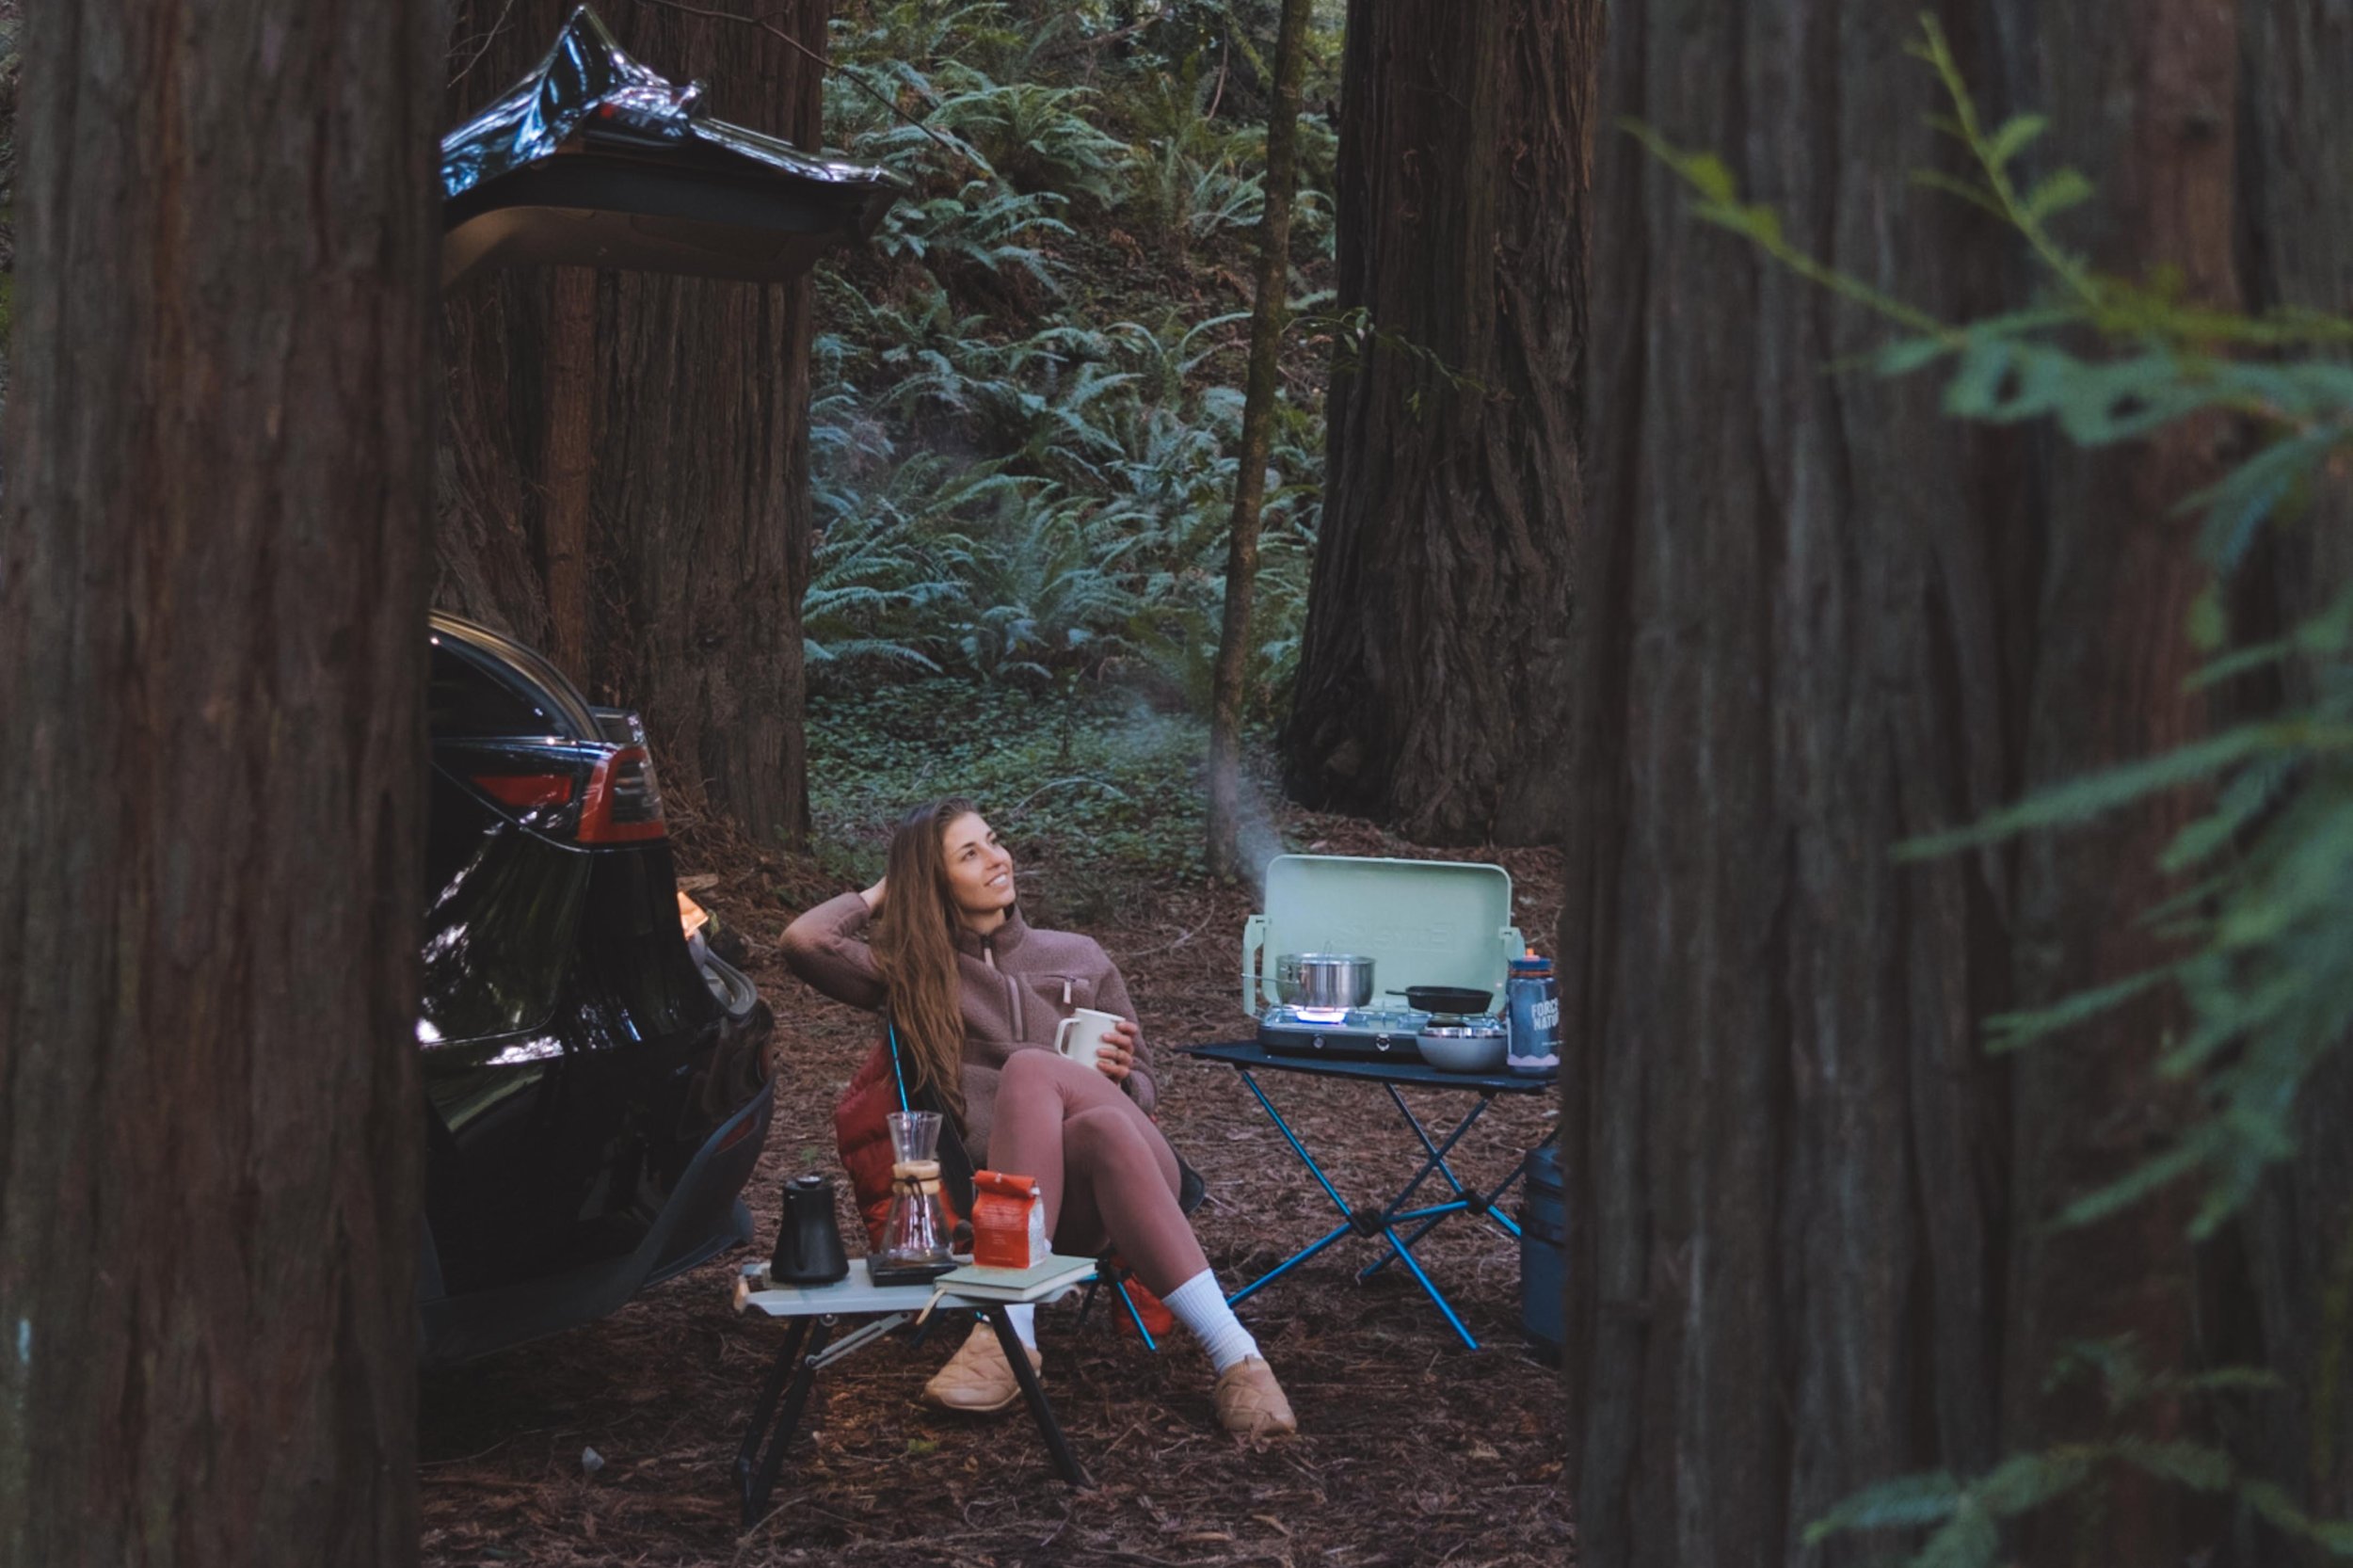 How to Plan a Car Camping Vacation - Savored Journeys